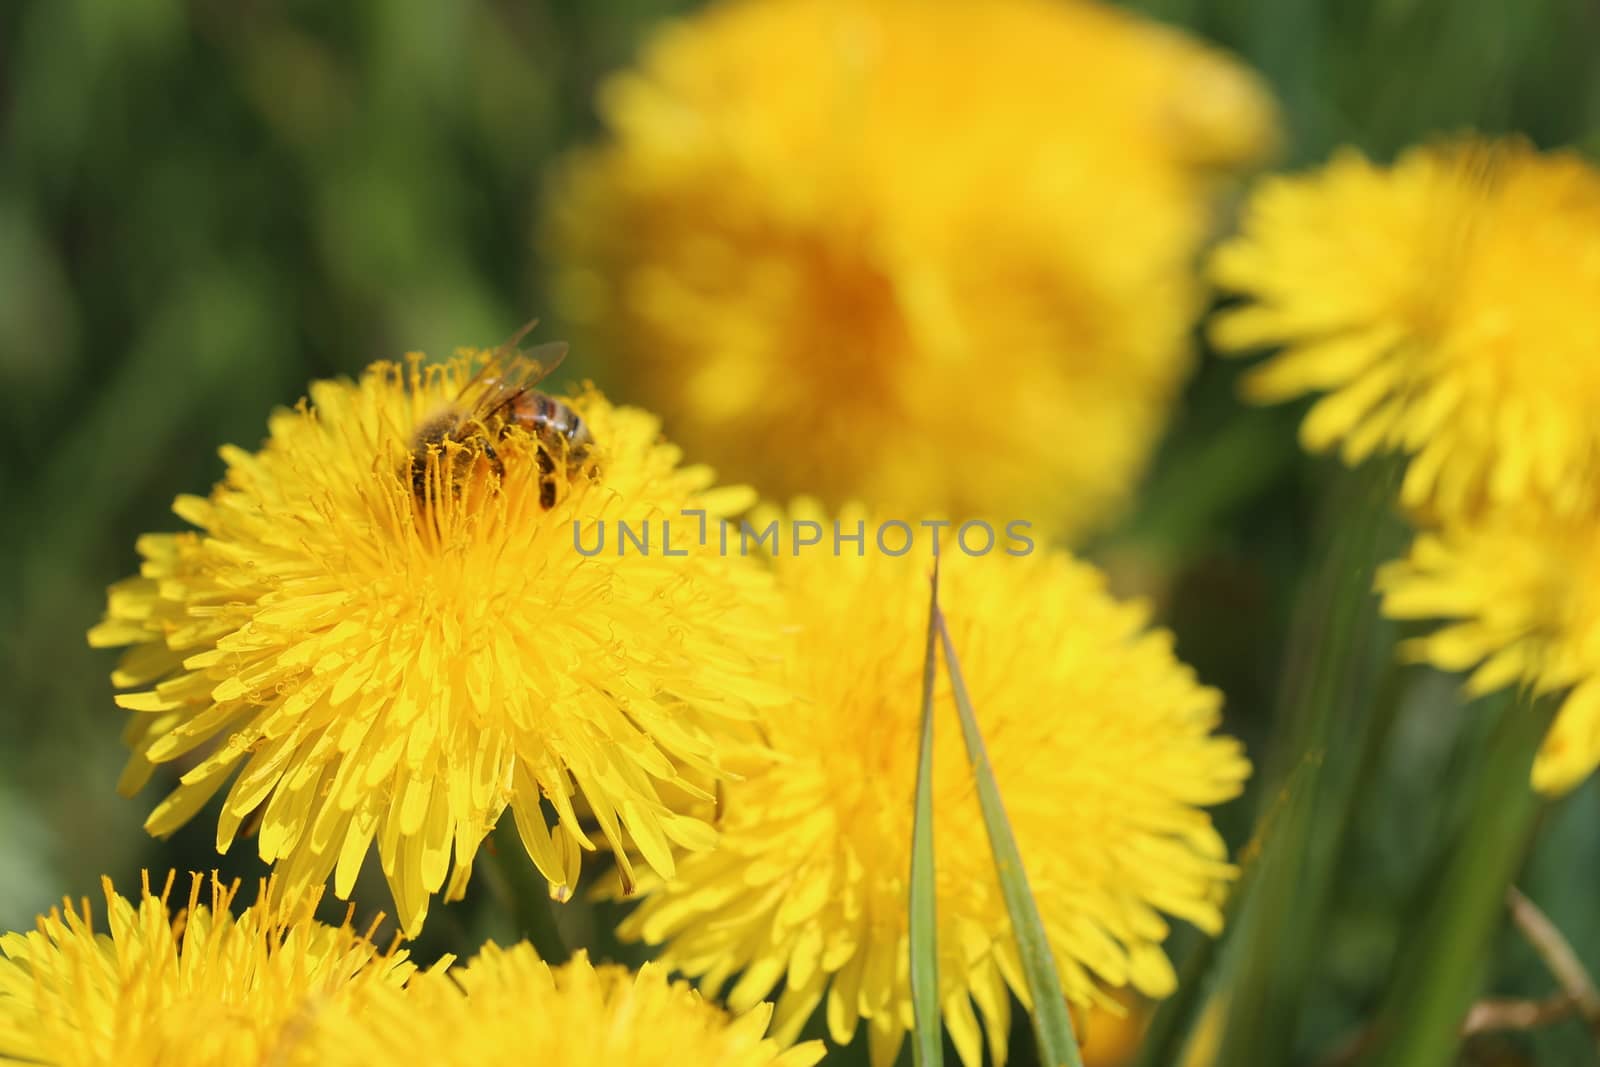 bee collecting pollen on a yellow dandelion flower